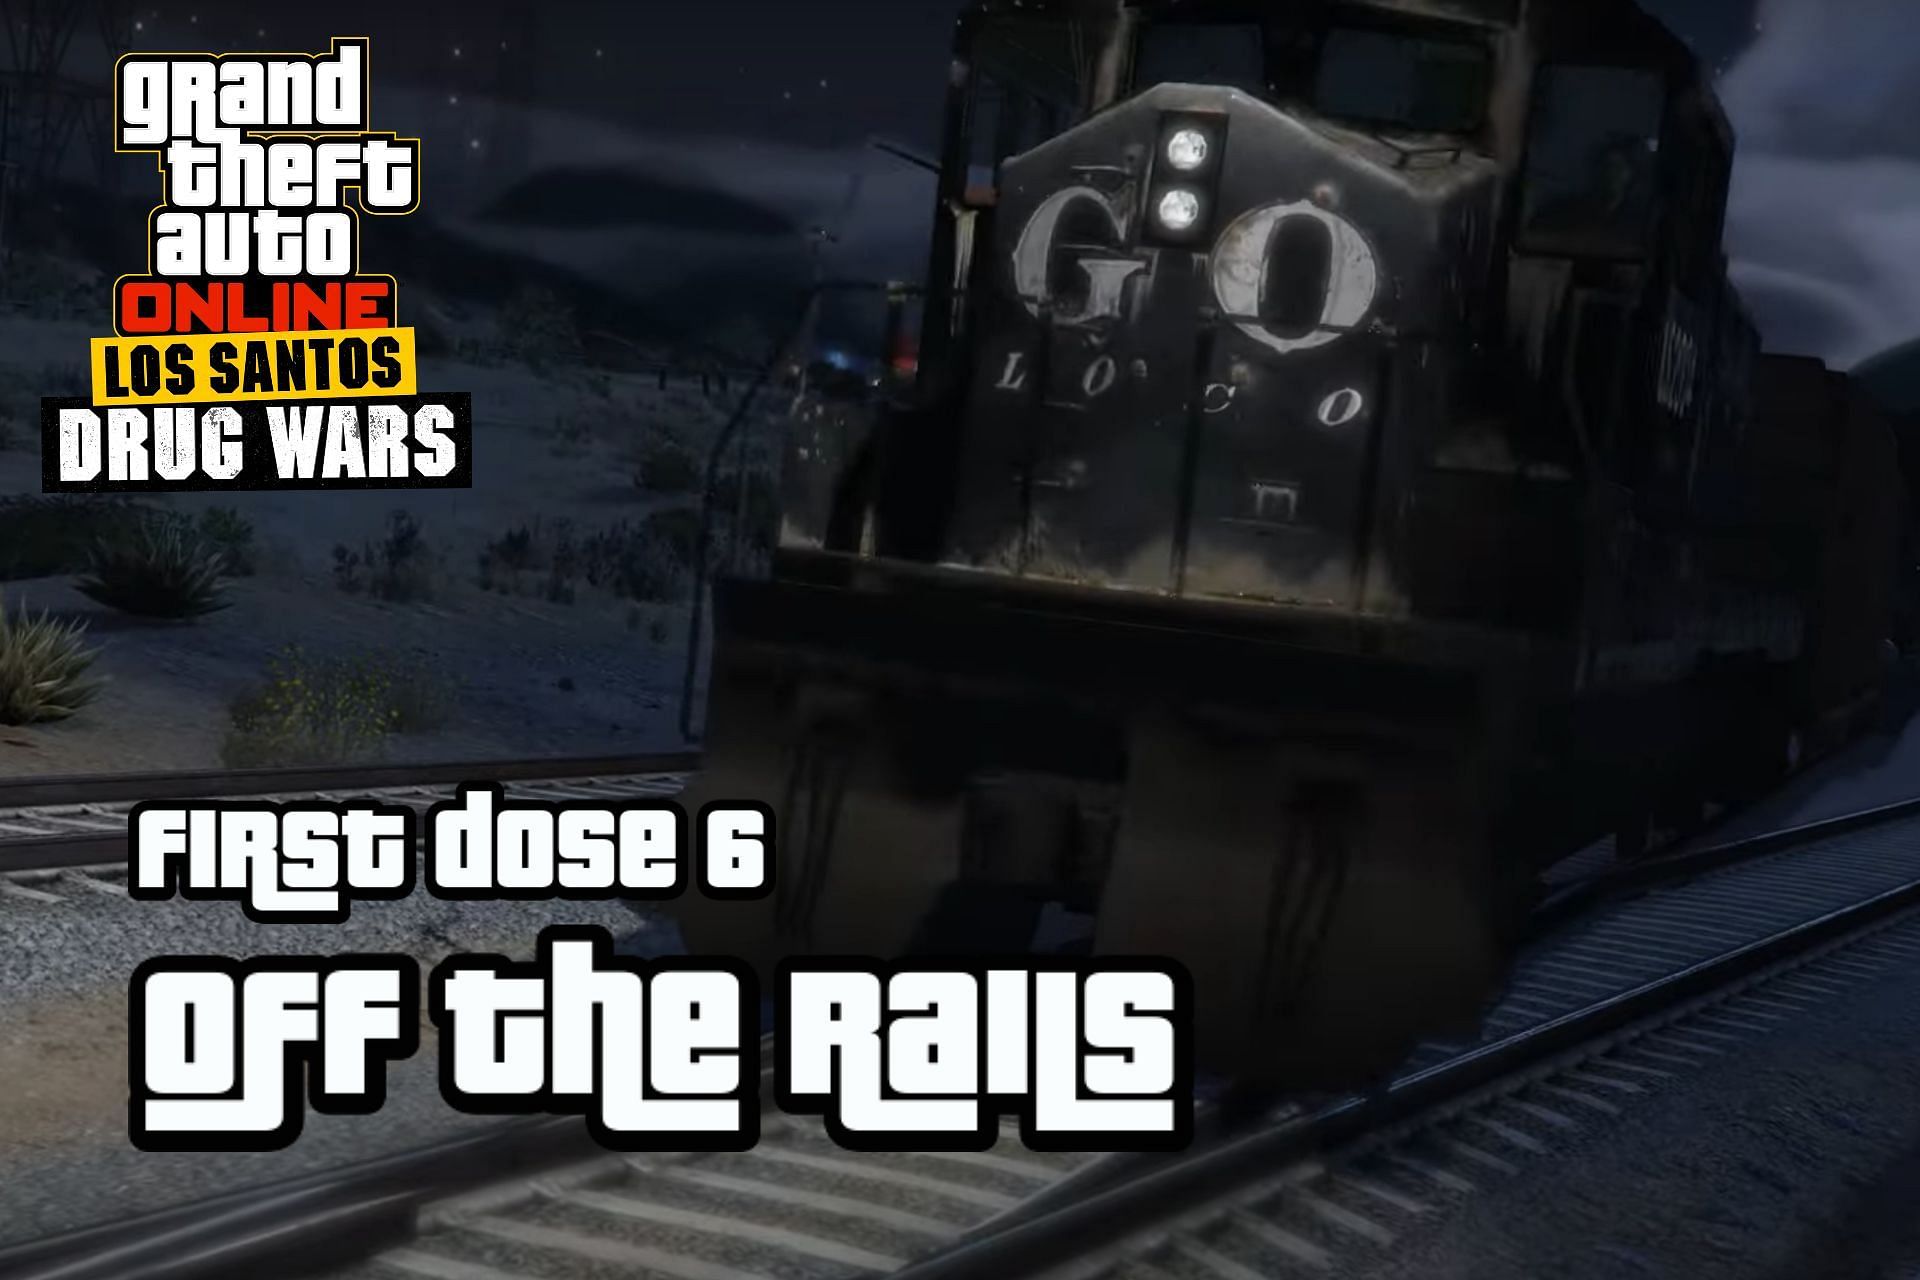 A screenshot from the Off the Rails mission in GTA Online (Image via YouTube/GTA Gentleman)